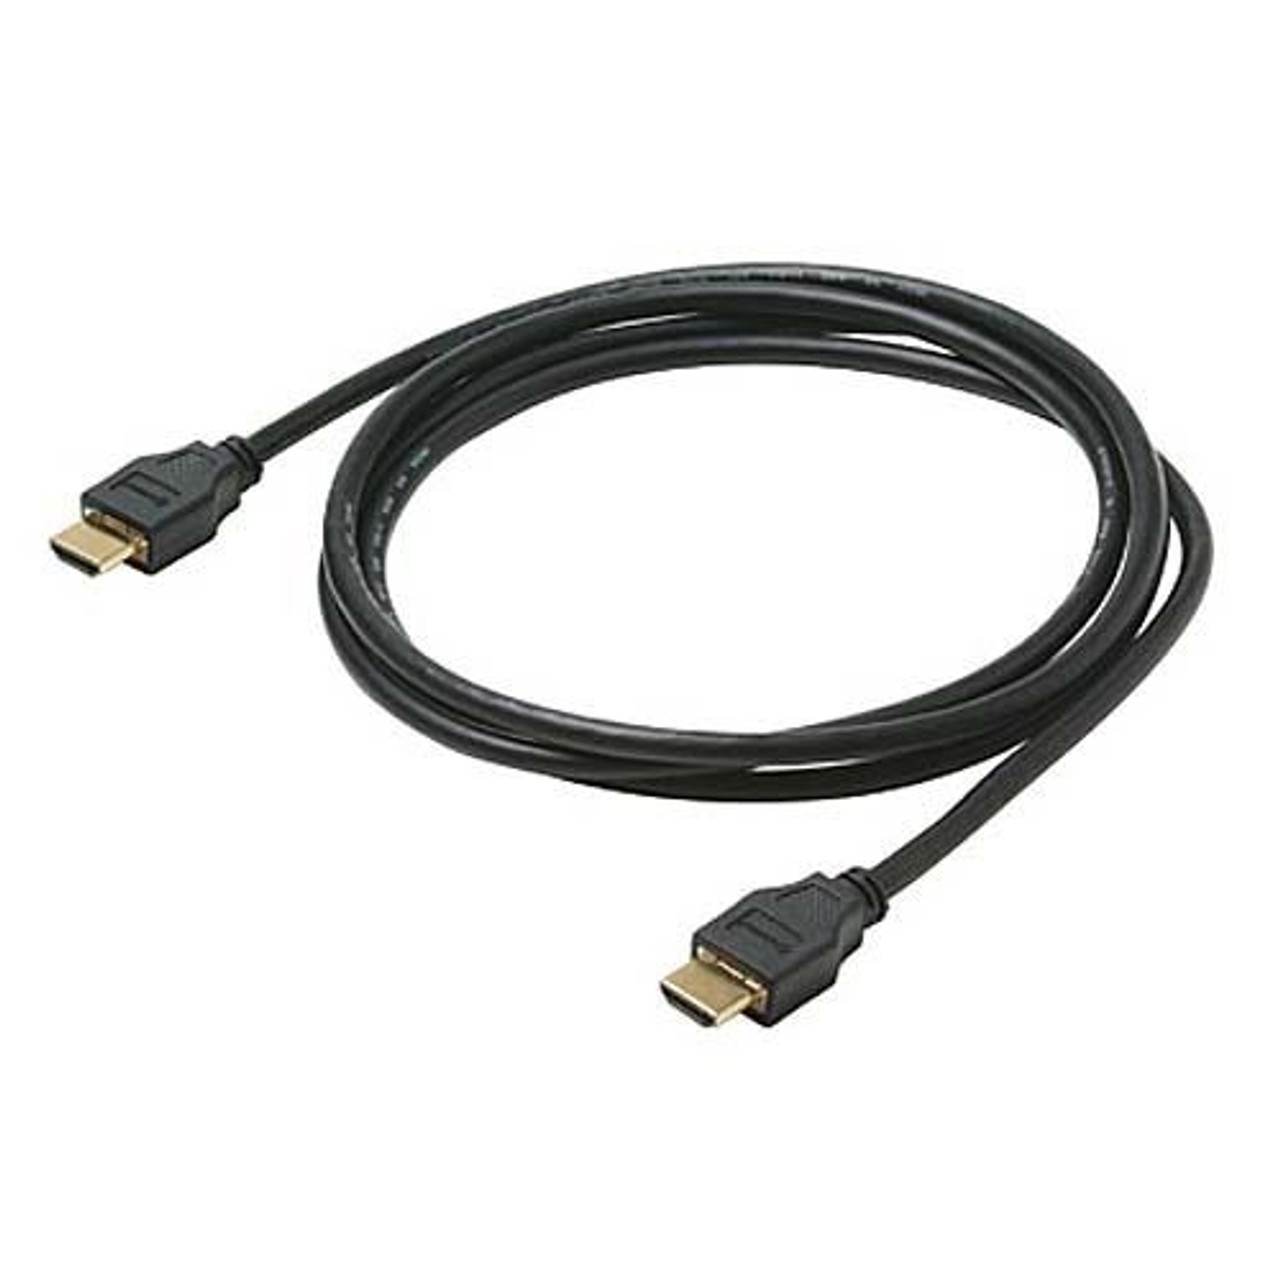 Steren 516-603BK 3' FT HDMI Cable Gold Plate 1080p 1.4 Approved HDTV Digital Video Resolution Male to Male 28 AWG High Definition Multi-Media Interface Interconnect with Gold Contacts, Part # 516603-BK